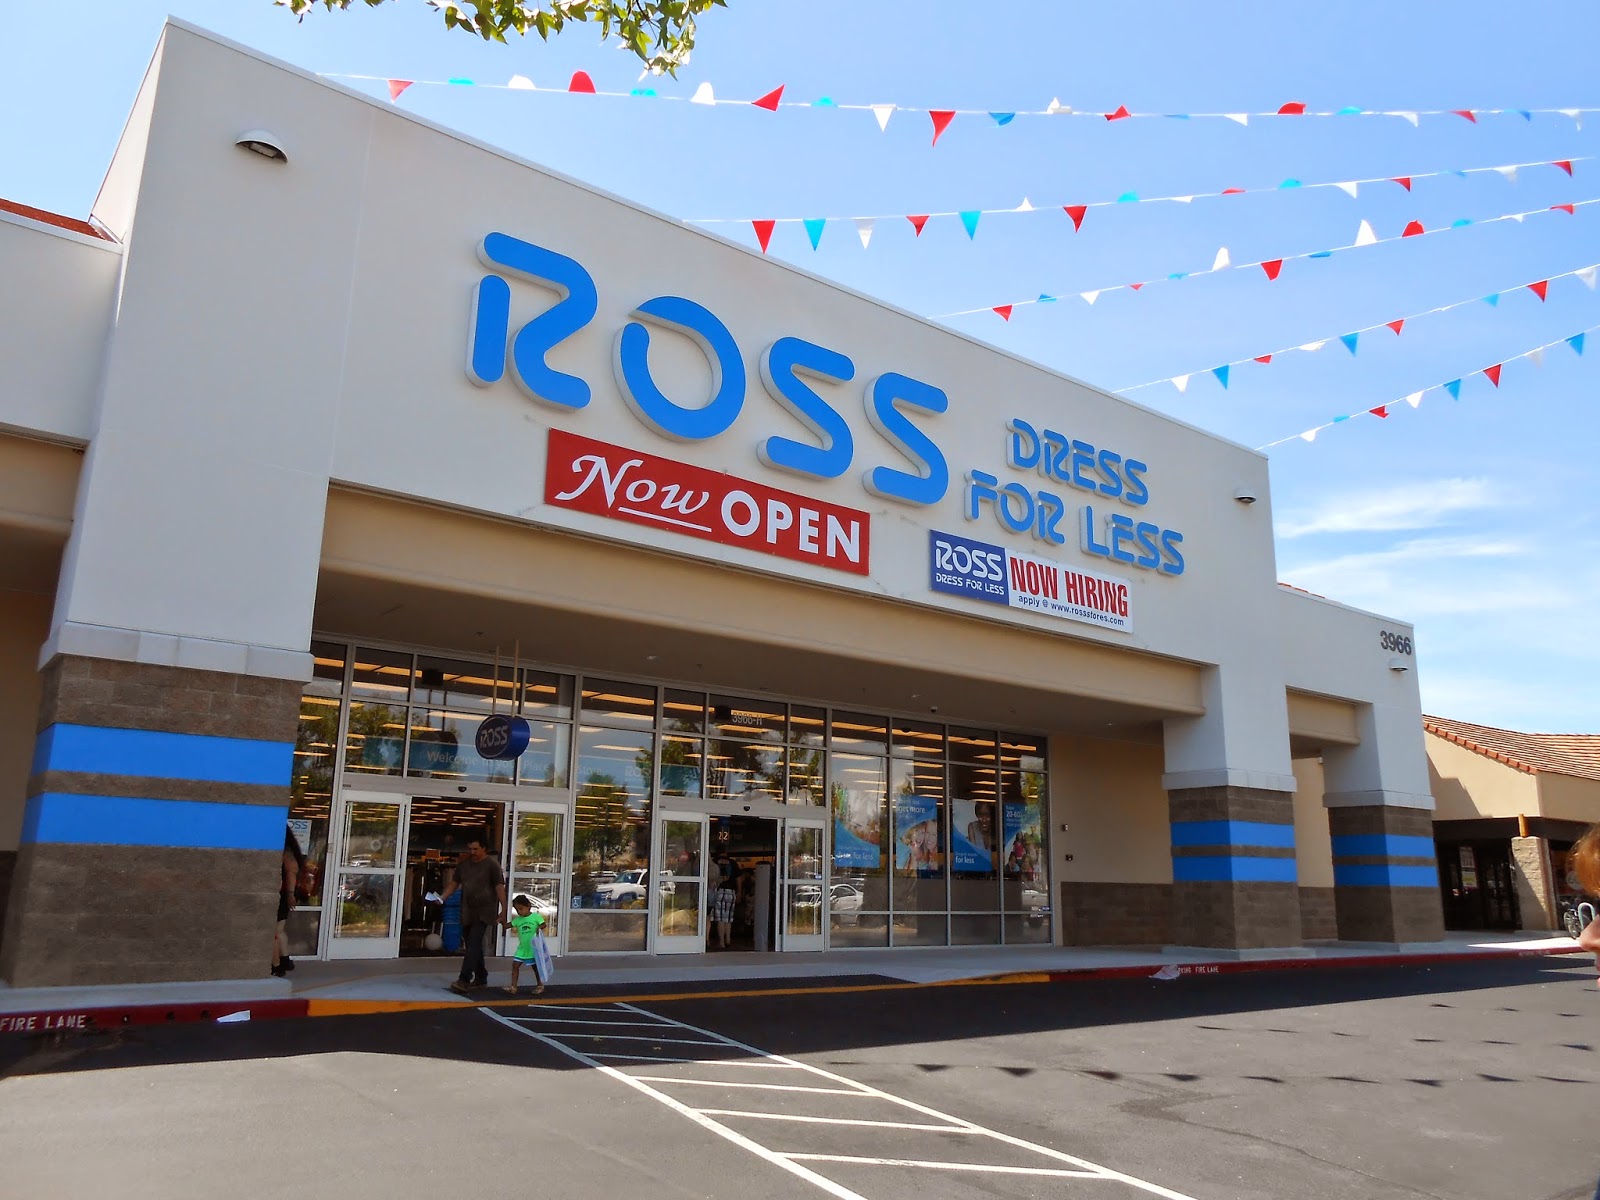 Hayden's Business Blog: Ross Dress for Less in Placerville is now open!